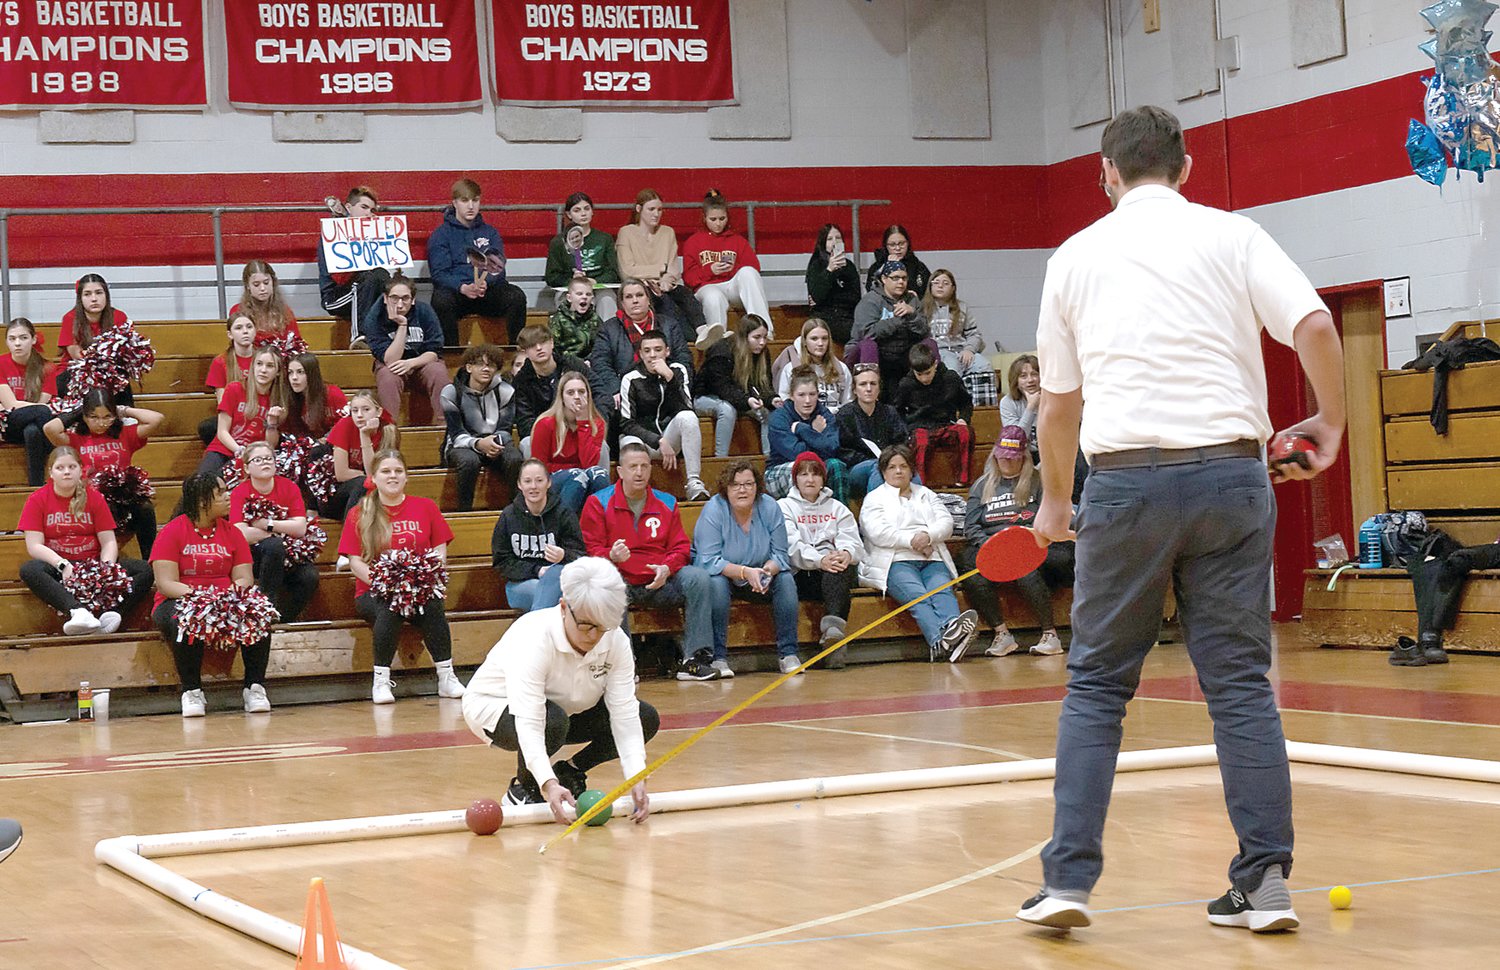 Officials measure the placement of two balls on the court as the crowd awaits the ruling.